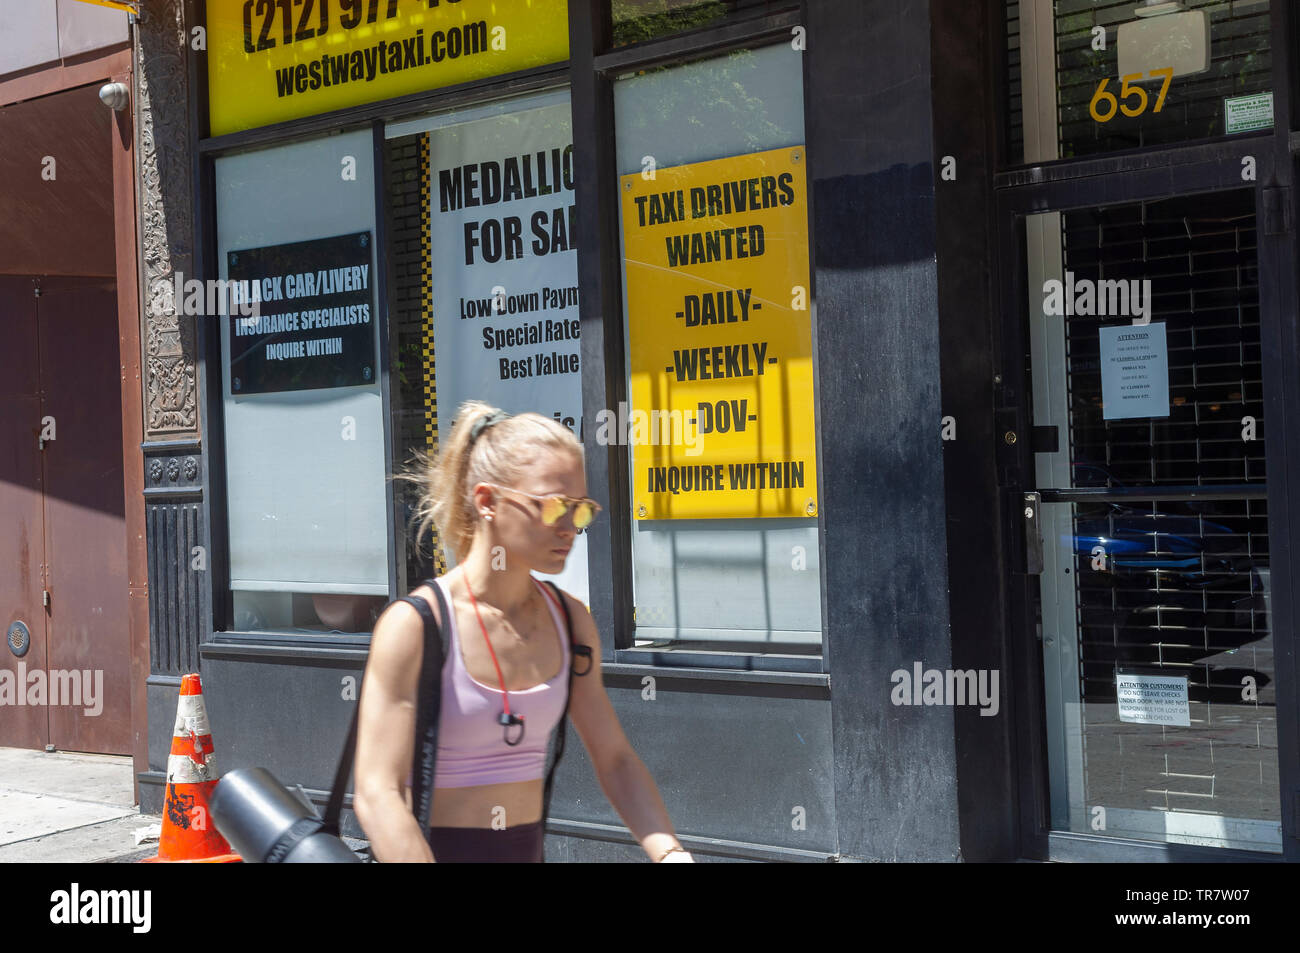 A taxi medallion brokerÕs offices in New York on Sunday, May 26, 2019. Following an investigation by the New York Times the NYS Attorney General has launched a probe into the taxi medallion business and its loan practices. (© Richard B. Levine) Stock Photo